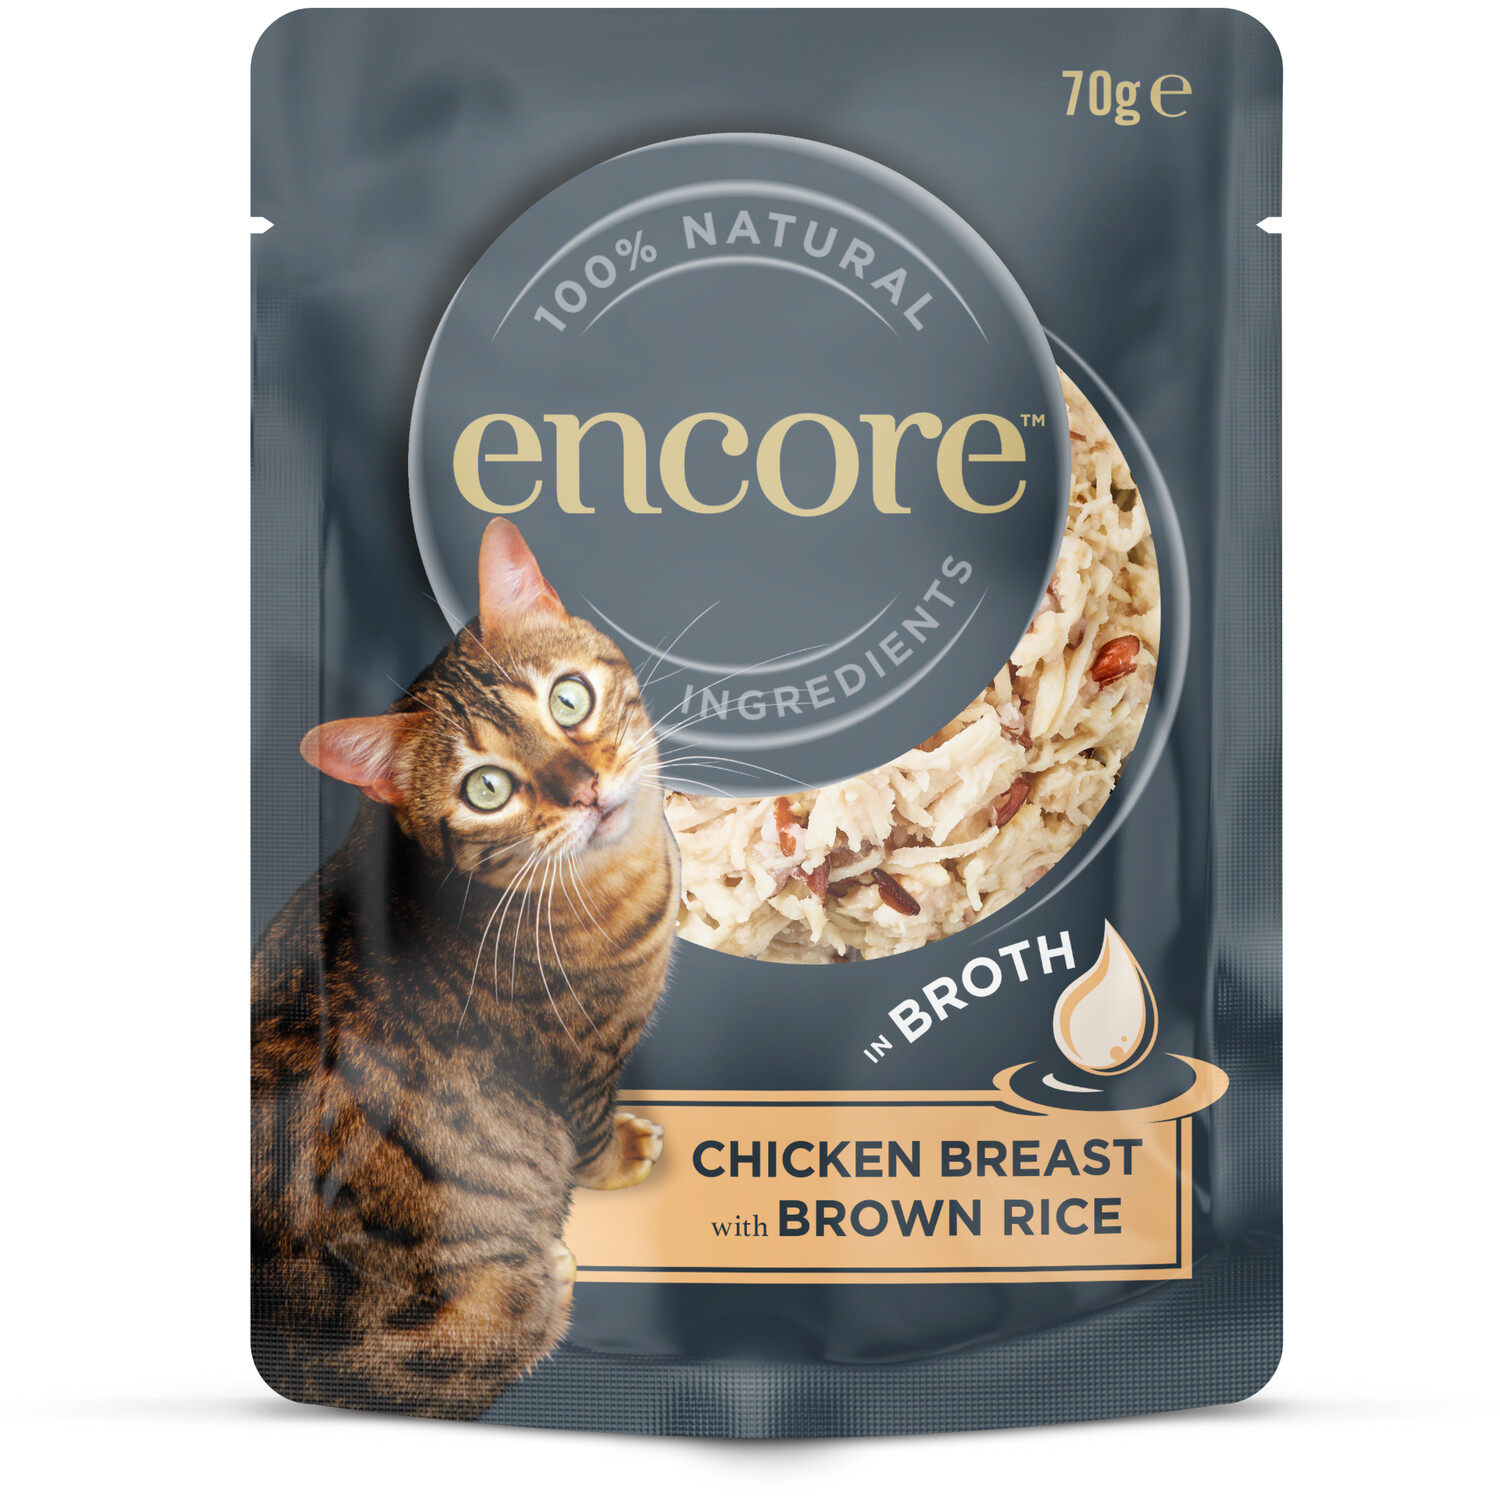 Encore Wet Cat Food in Broth Pouch 70g - Chicken Breast with Brown Rice Image 1